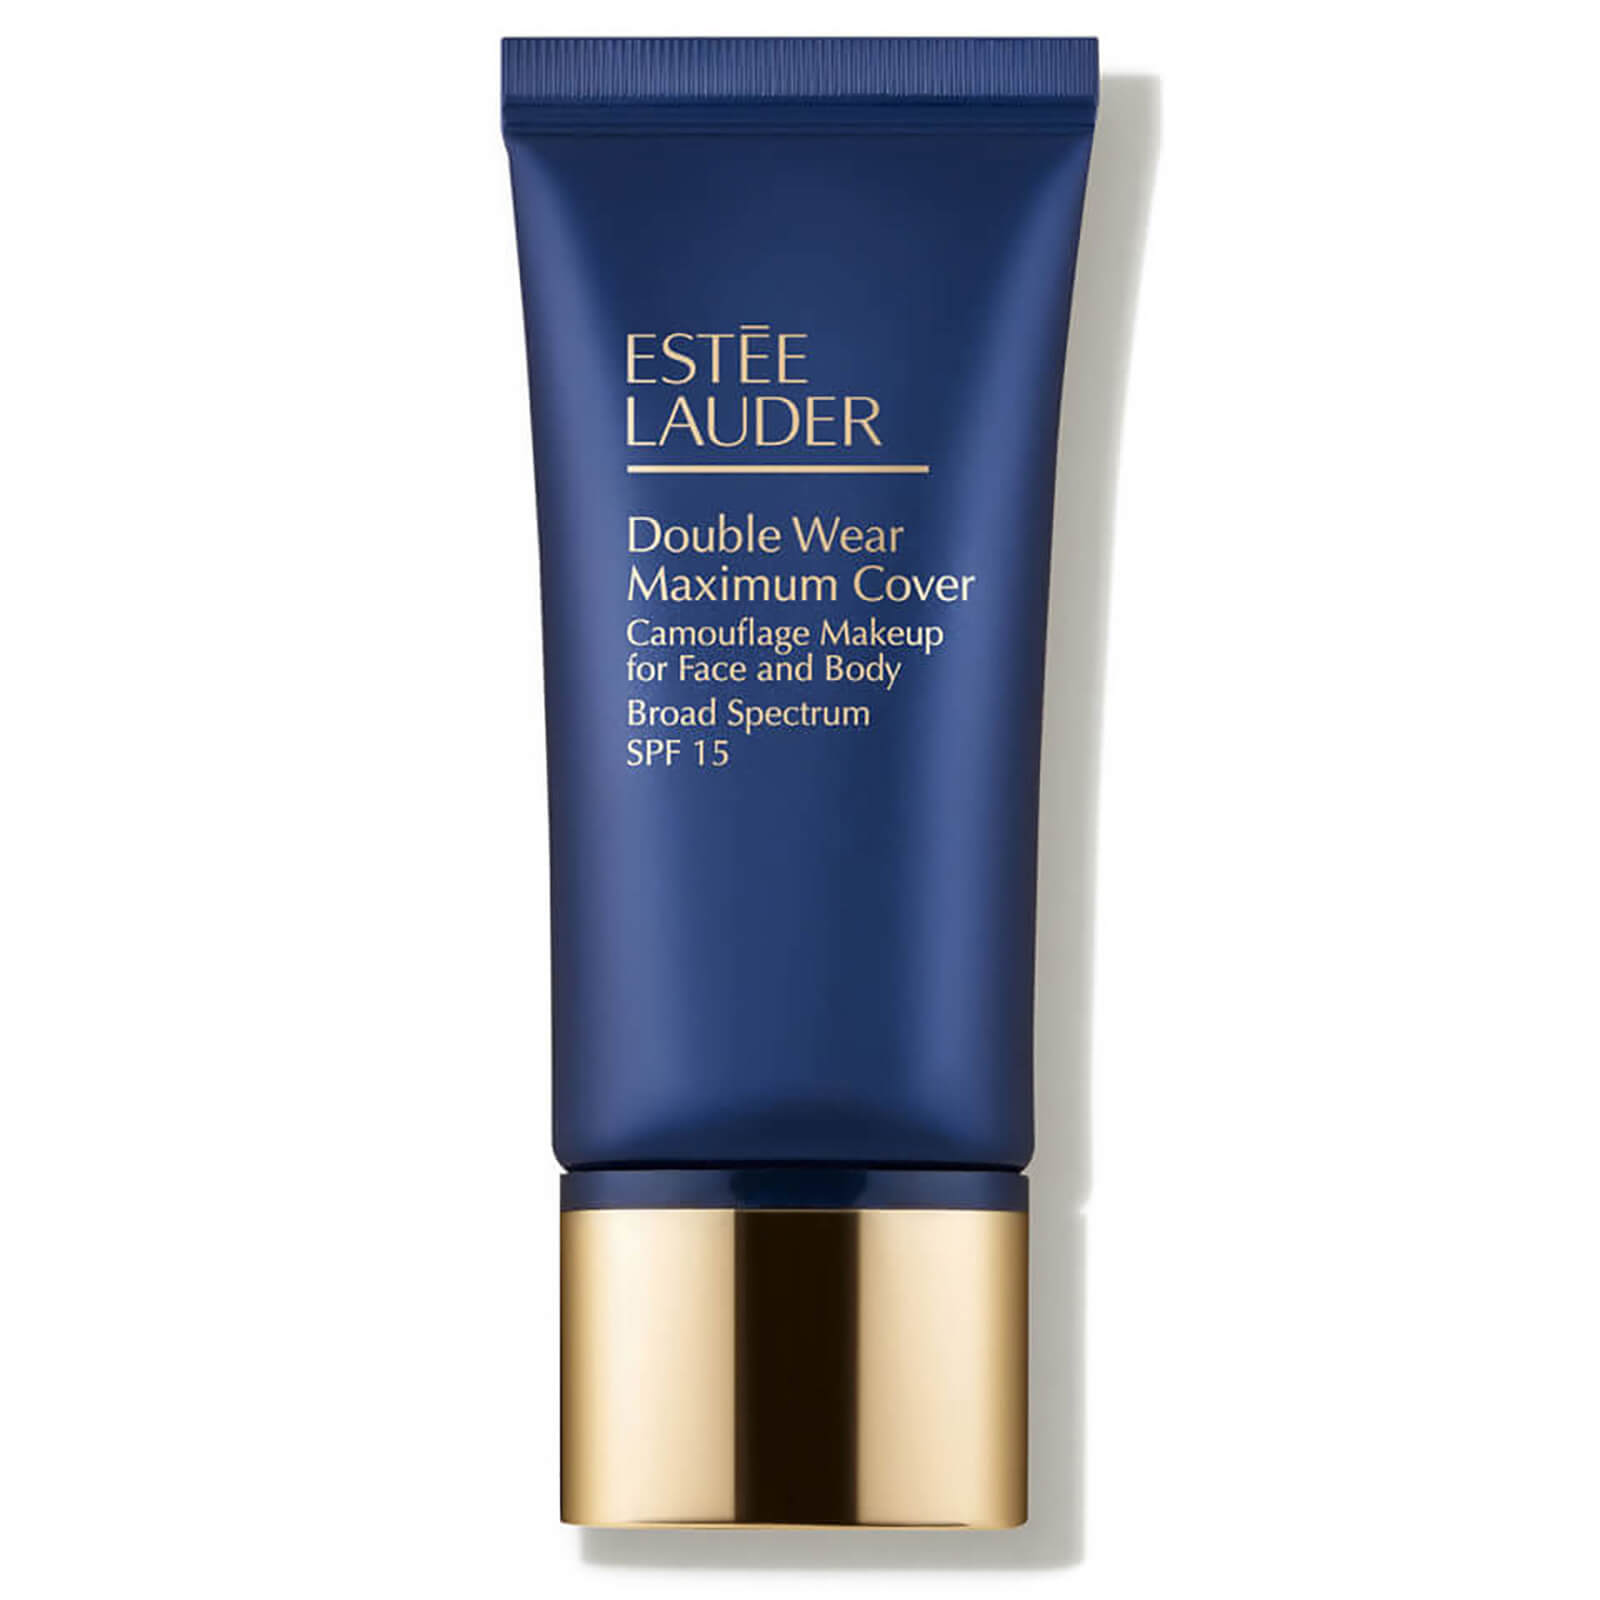 Estée Lauder Double Wear Maximum Cover Camouflage Makeup For Face And Body Spf 15 (1 Oz.) In 2w2 Rattan